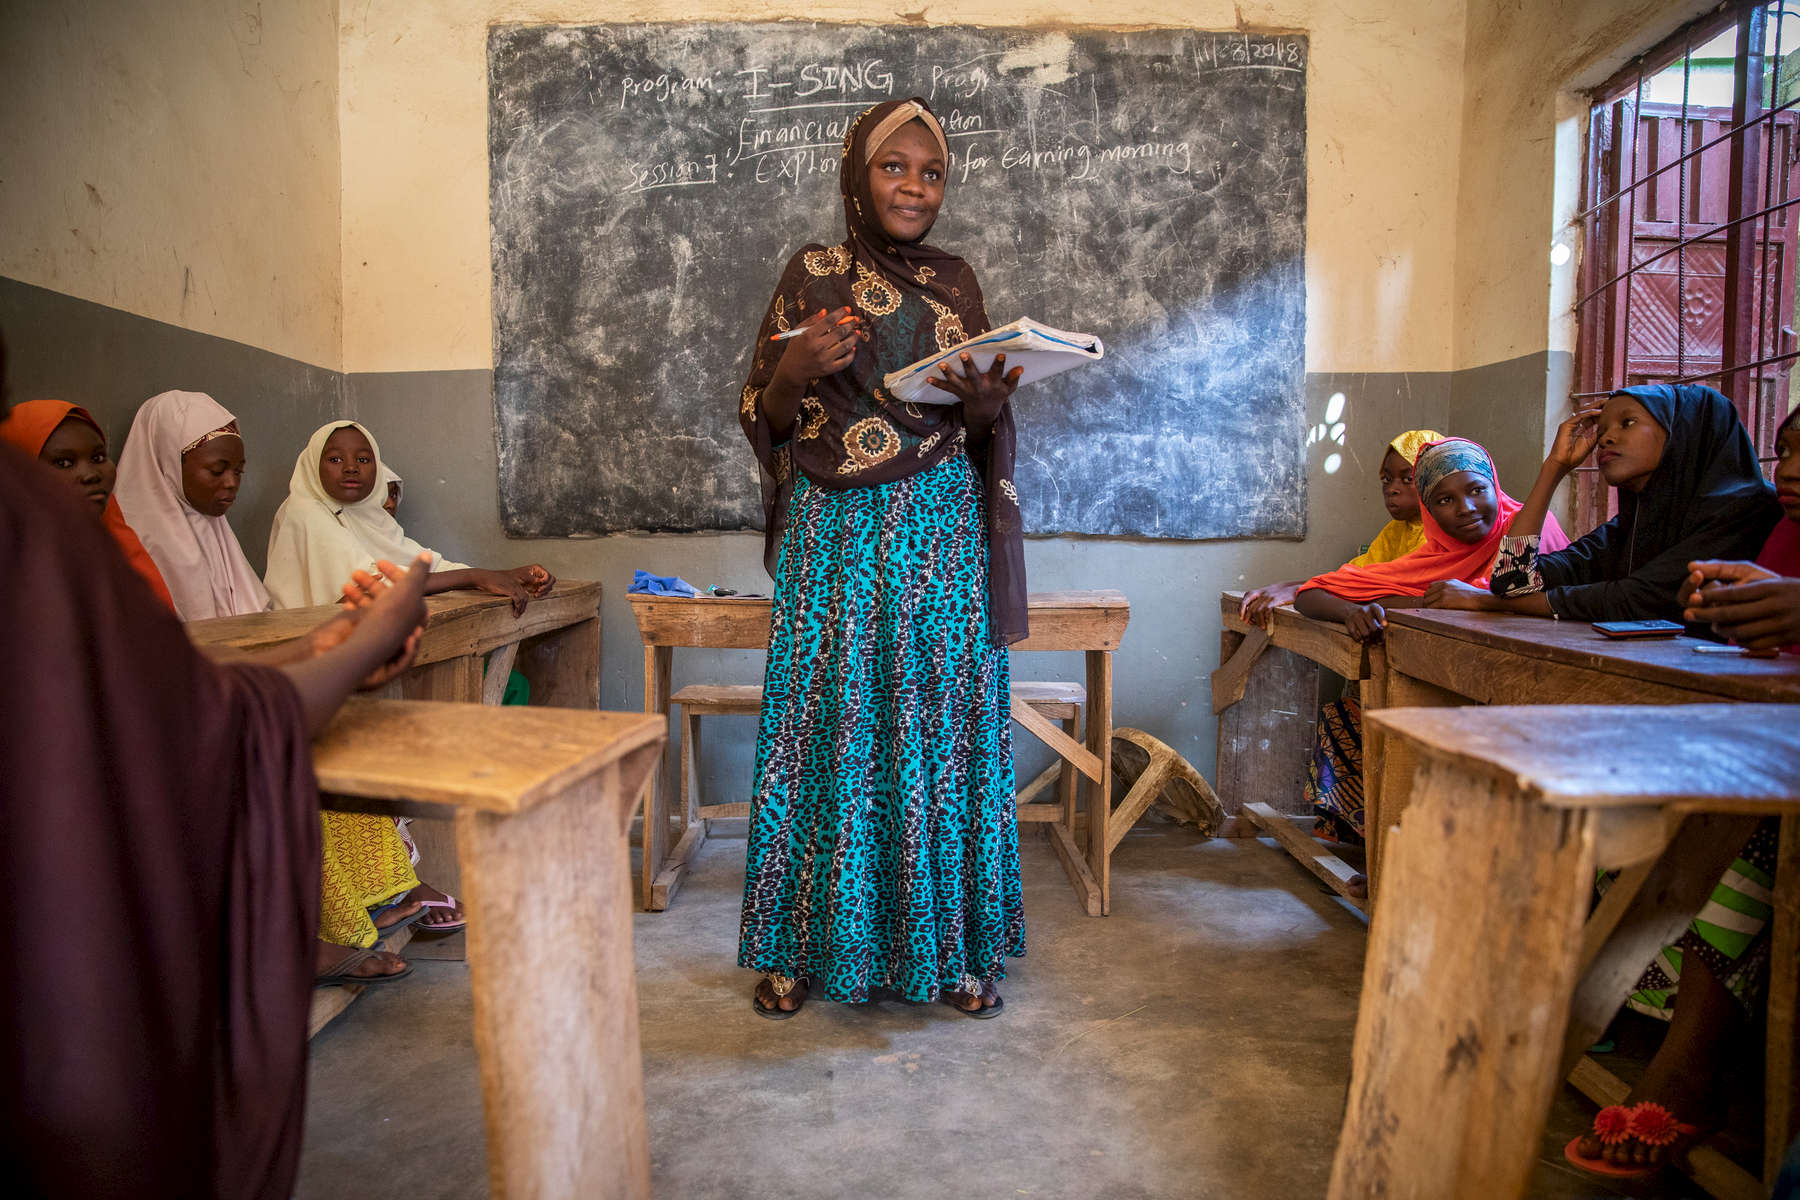 Suwaiba Yakubu Adam (18, brown hijab) teaches a group of 25 girls from her community who she identified and recruited herself. Using the same curriculum she learned from Mercy Corps, she guides lessons in everything from financial literacy to sexual health, believing sharing of this knowledge can be transformative for them. Suwaiba has been through a great deal in her 18 years: the death of both her parents, harassment by local gangs, attacks by Boko Haram. Yet she perseveres, stoic and determined, crediting her parents for instilling in her a desire to help people. After participating in Mercy Corps’ girls group in her community — part of the I-SING program, which provides life and vocational skills to vulnerable youth in Boko Haram-affected areas — Suwaiba felt so strongly that more girls should have the opportunity that she started leading her own group, independent of the Mercy Corps program.With the Boko Haram crisis behind her, she’s continuing to pursue to her own ambitions too: she wants to complete school and become a pharmacist, because it’s a way to serve her community. 